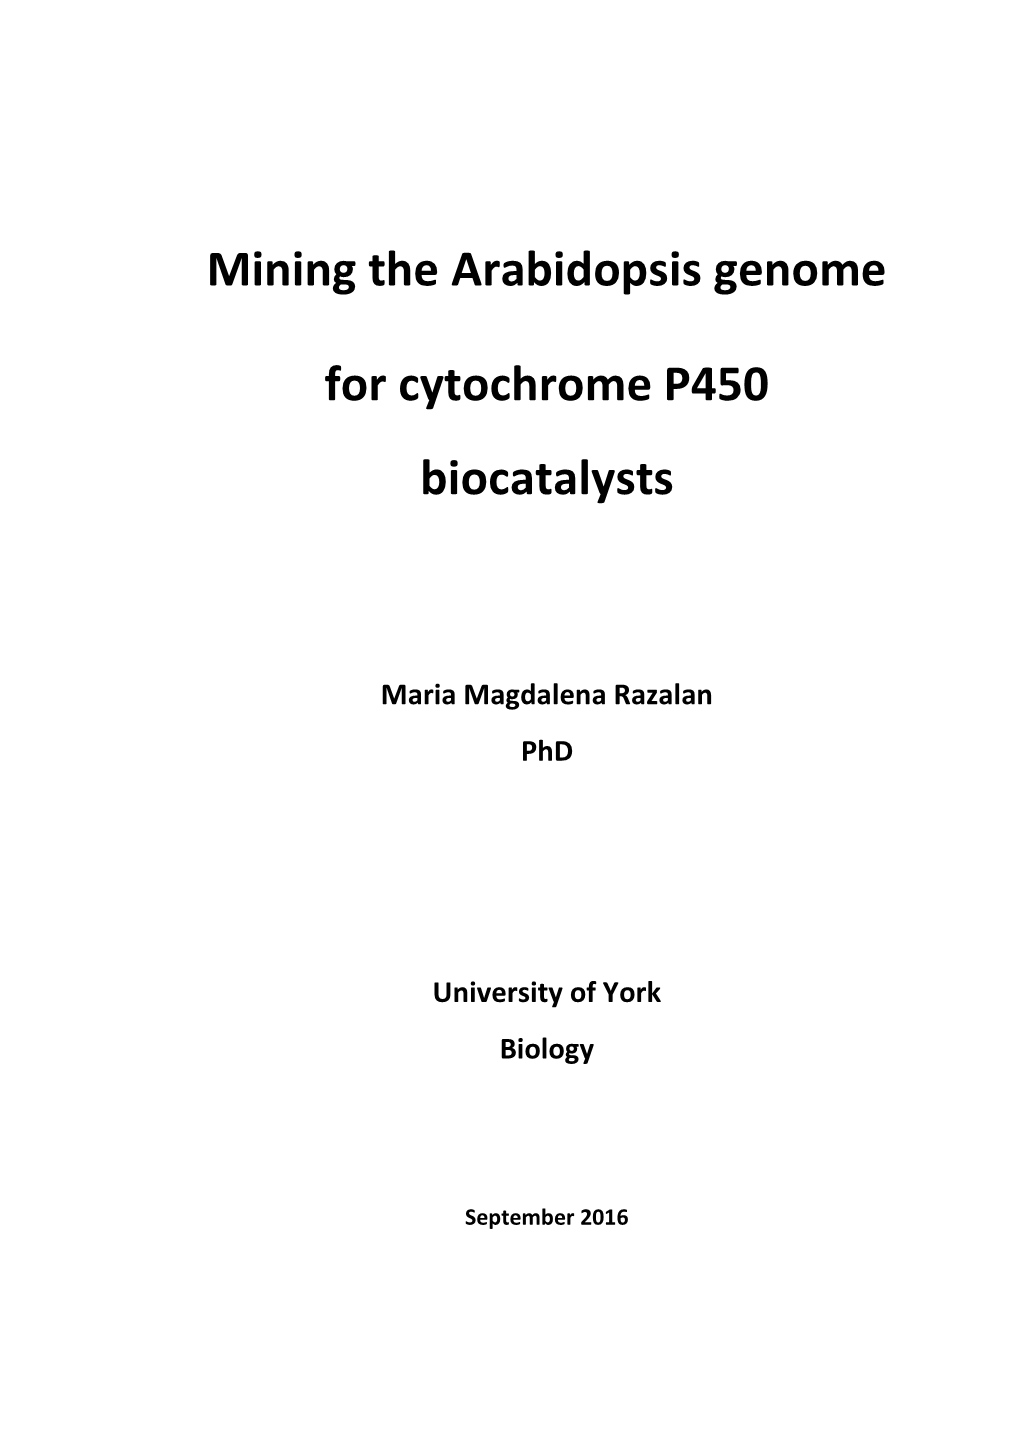 Mining the Arabidopsis Genome for Cytochrome P450 Biocatalysts